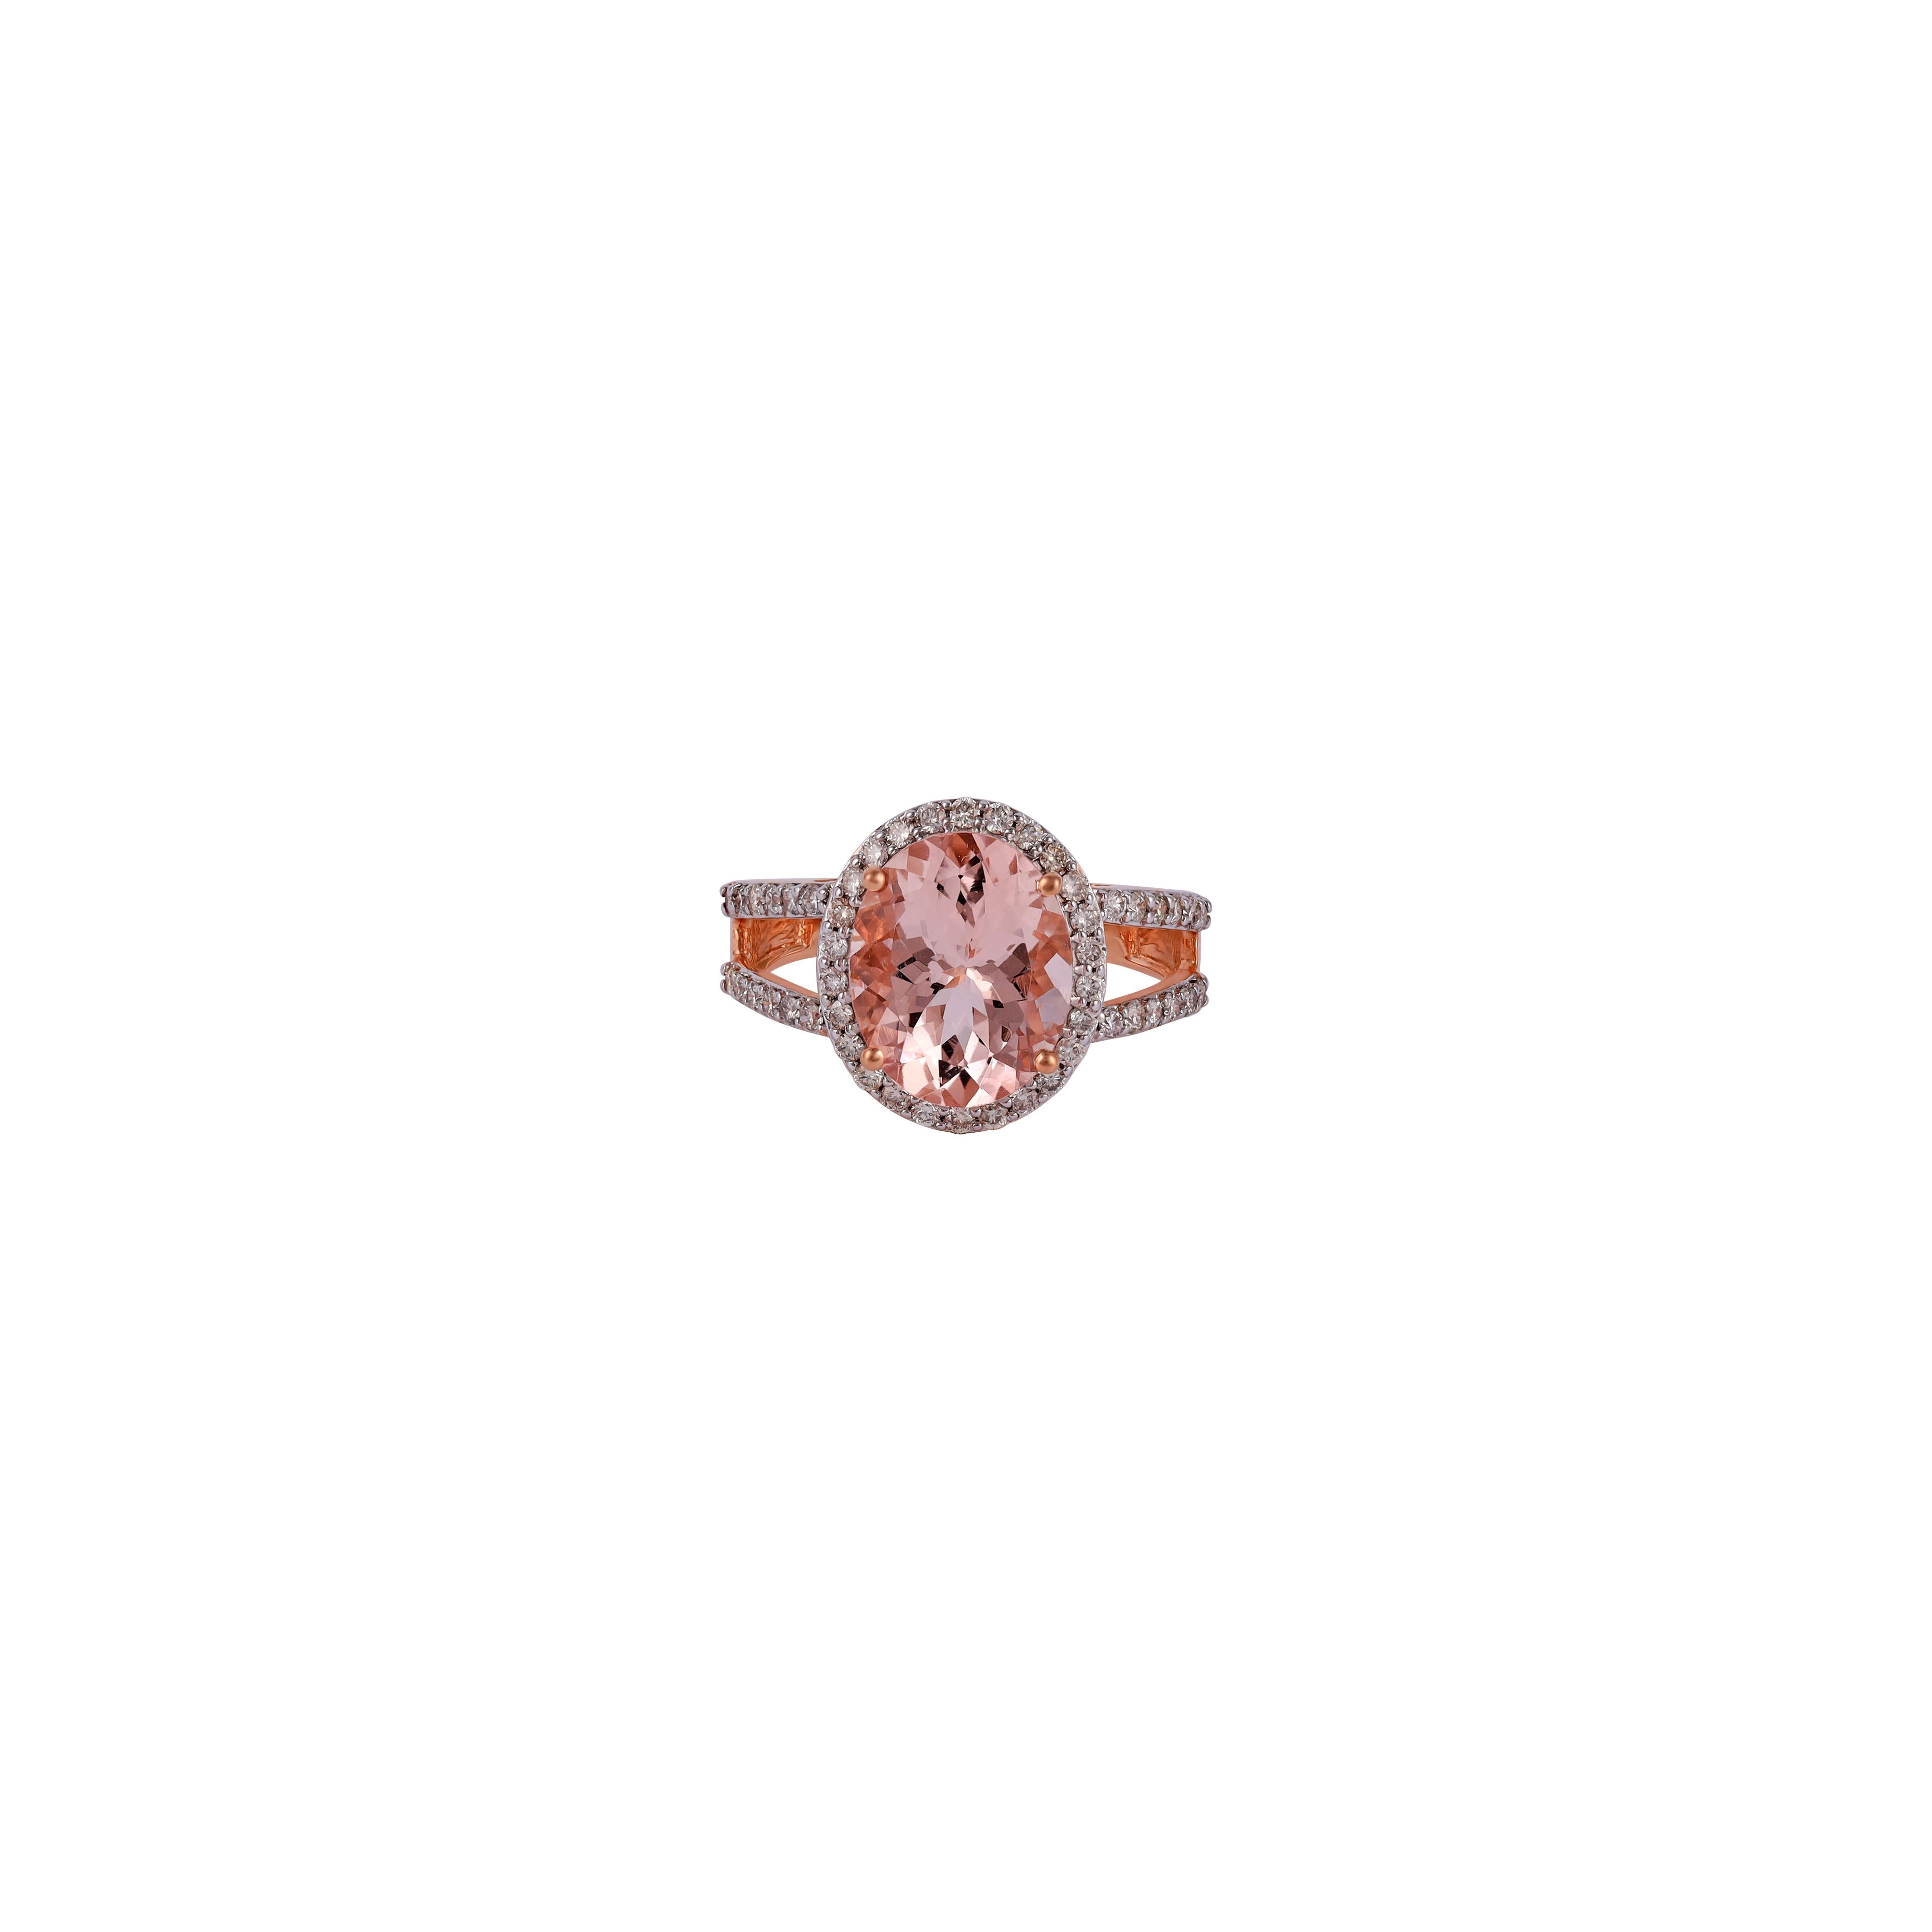 If you are looking for Morganite Ring, this is the ultimate find, (3.08 carats) of the finest Morganite color is the focal point. Perfectly matched in color, size, luster, and transparency. The color is what you want. The diamonds  surrounding the